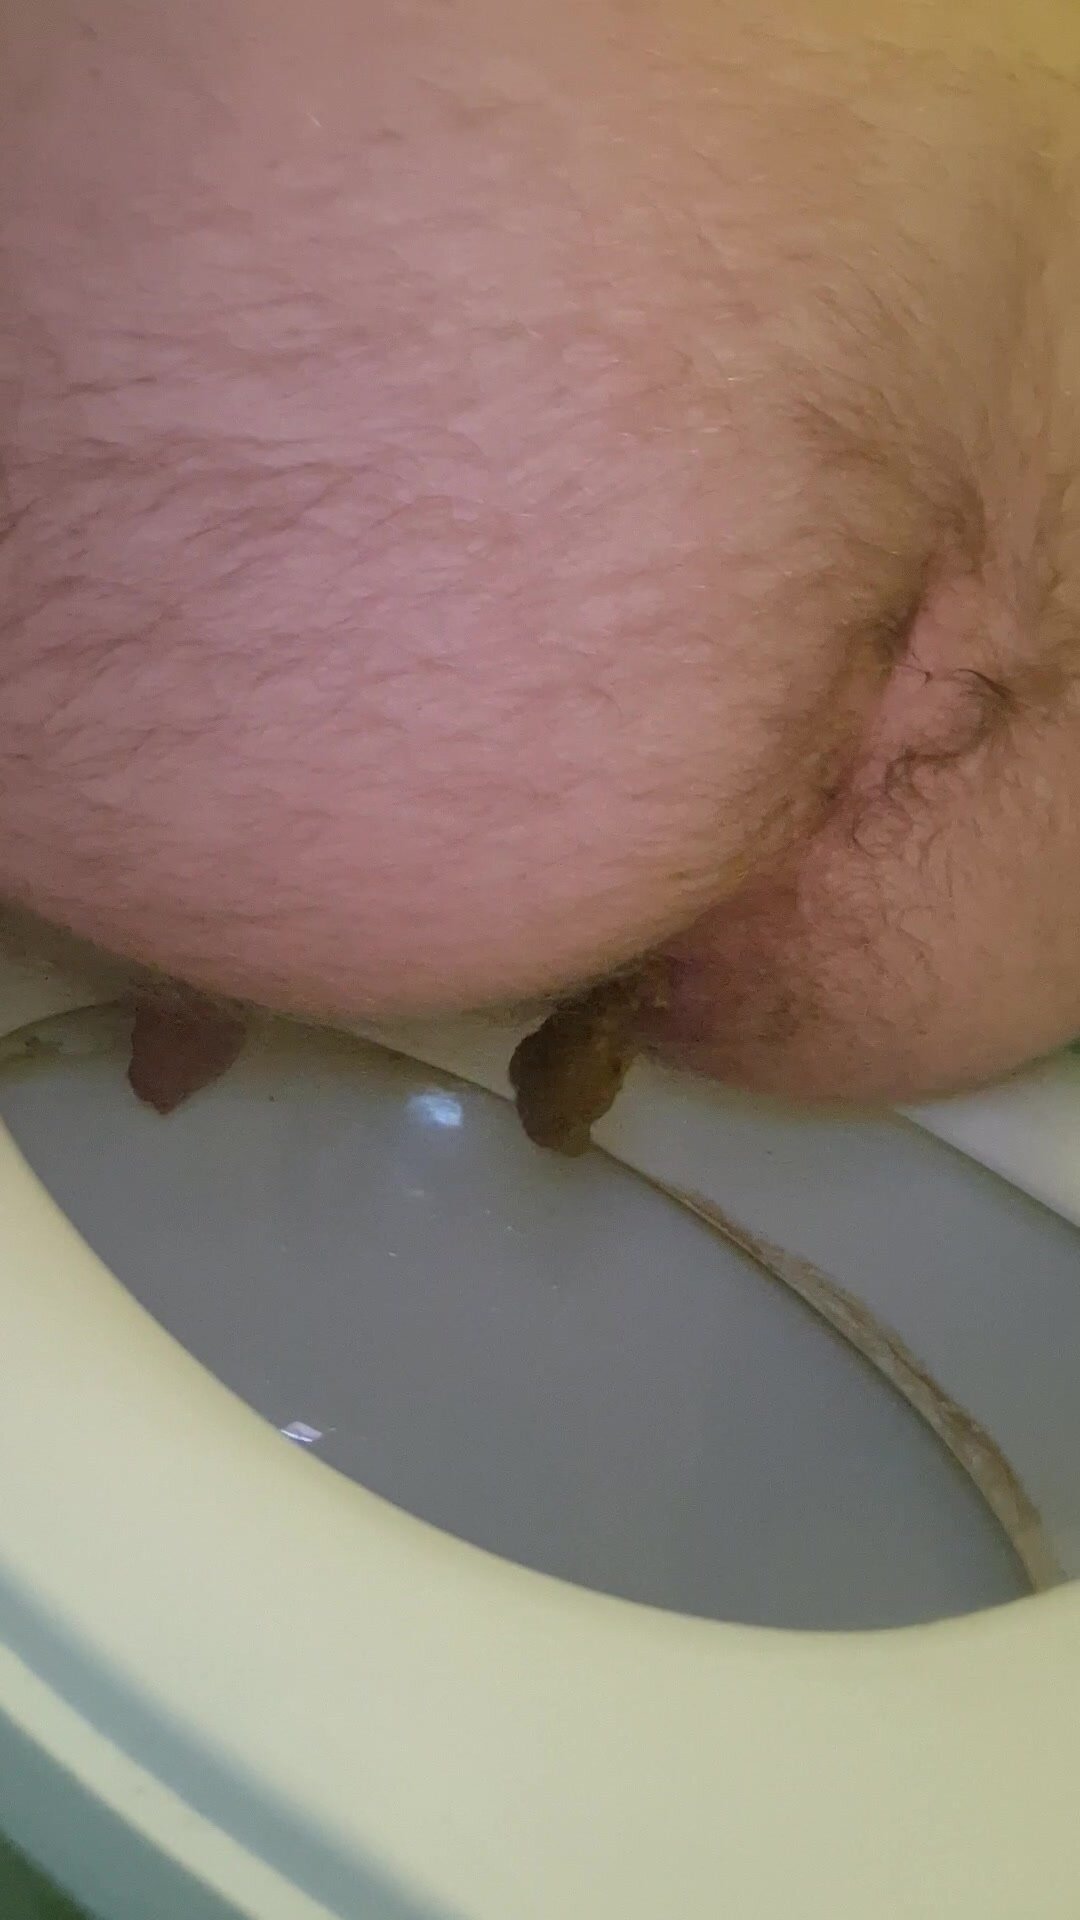 Nice soft poo in the evening